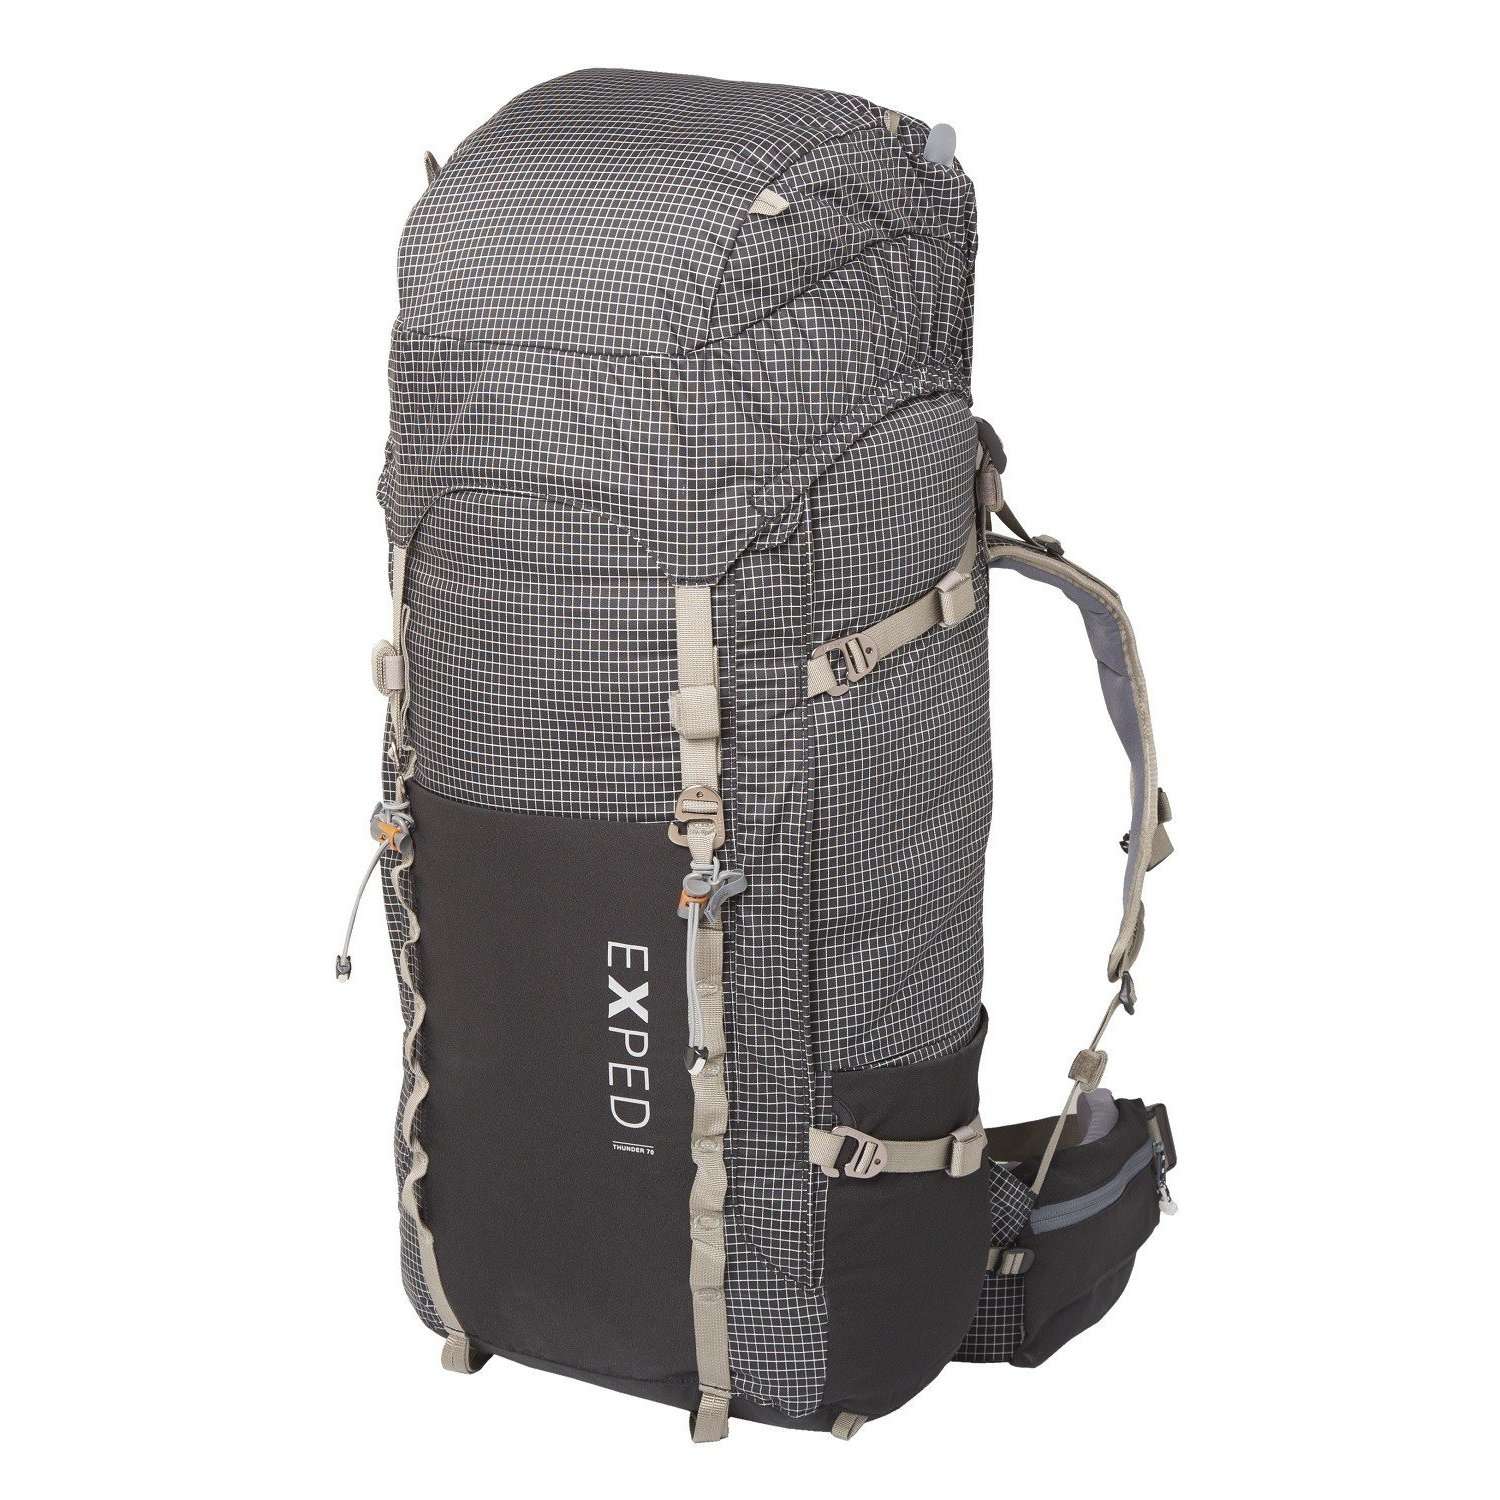 Exped, Exped Thunder 50 Litre, Rucksacks/Packs,Wylies Outdoor World,